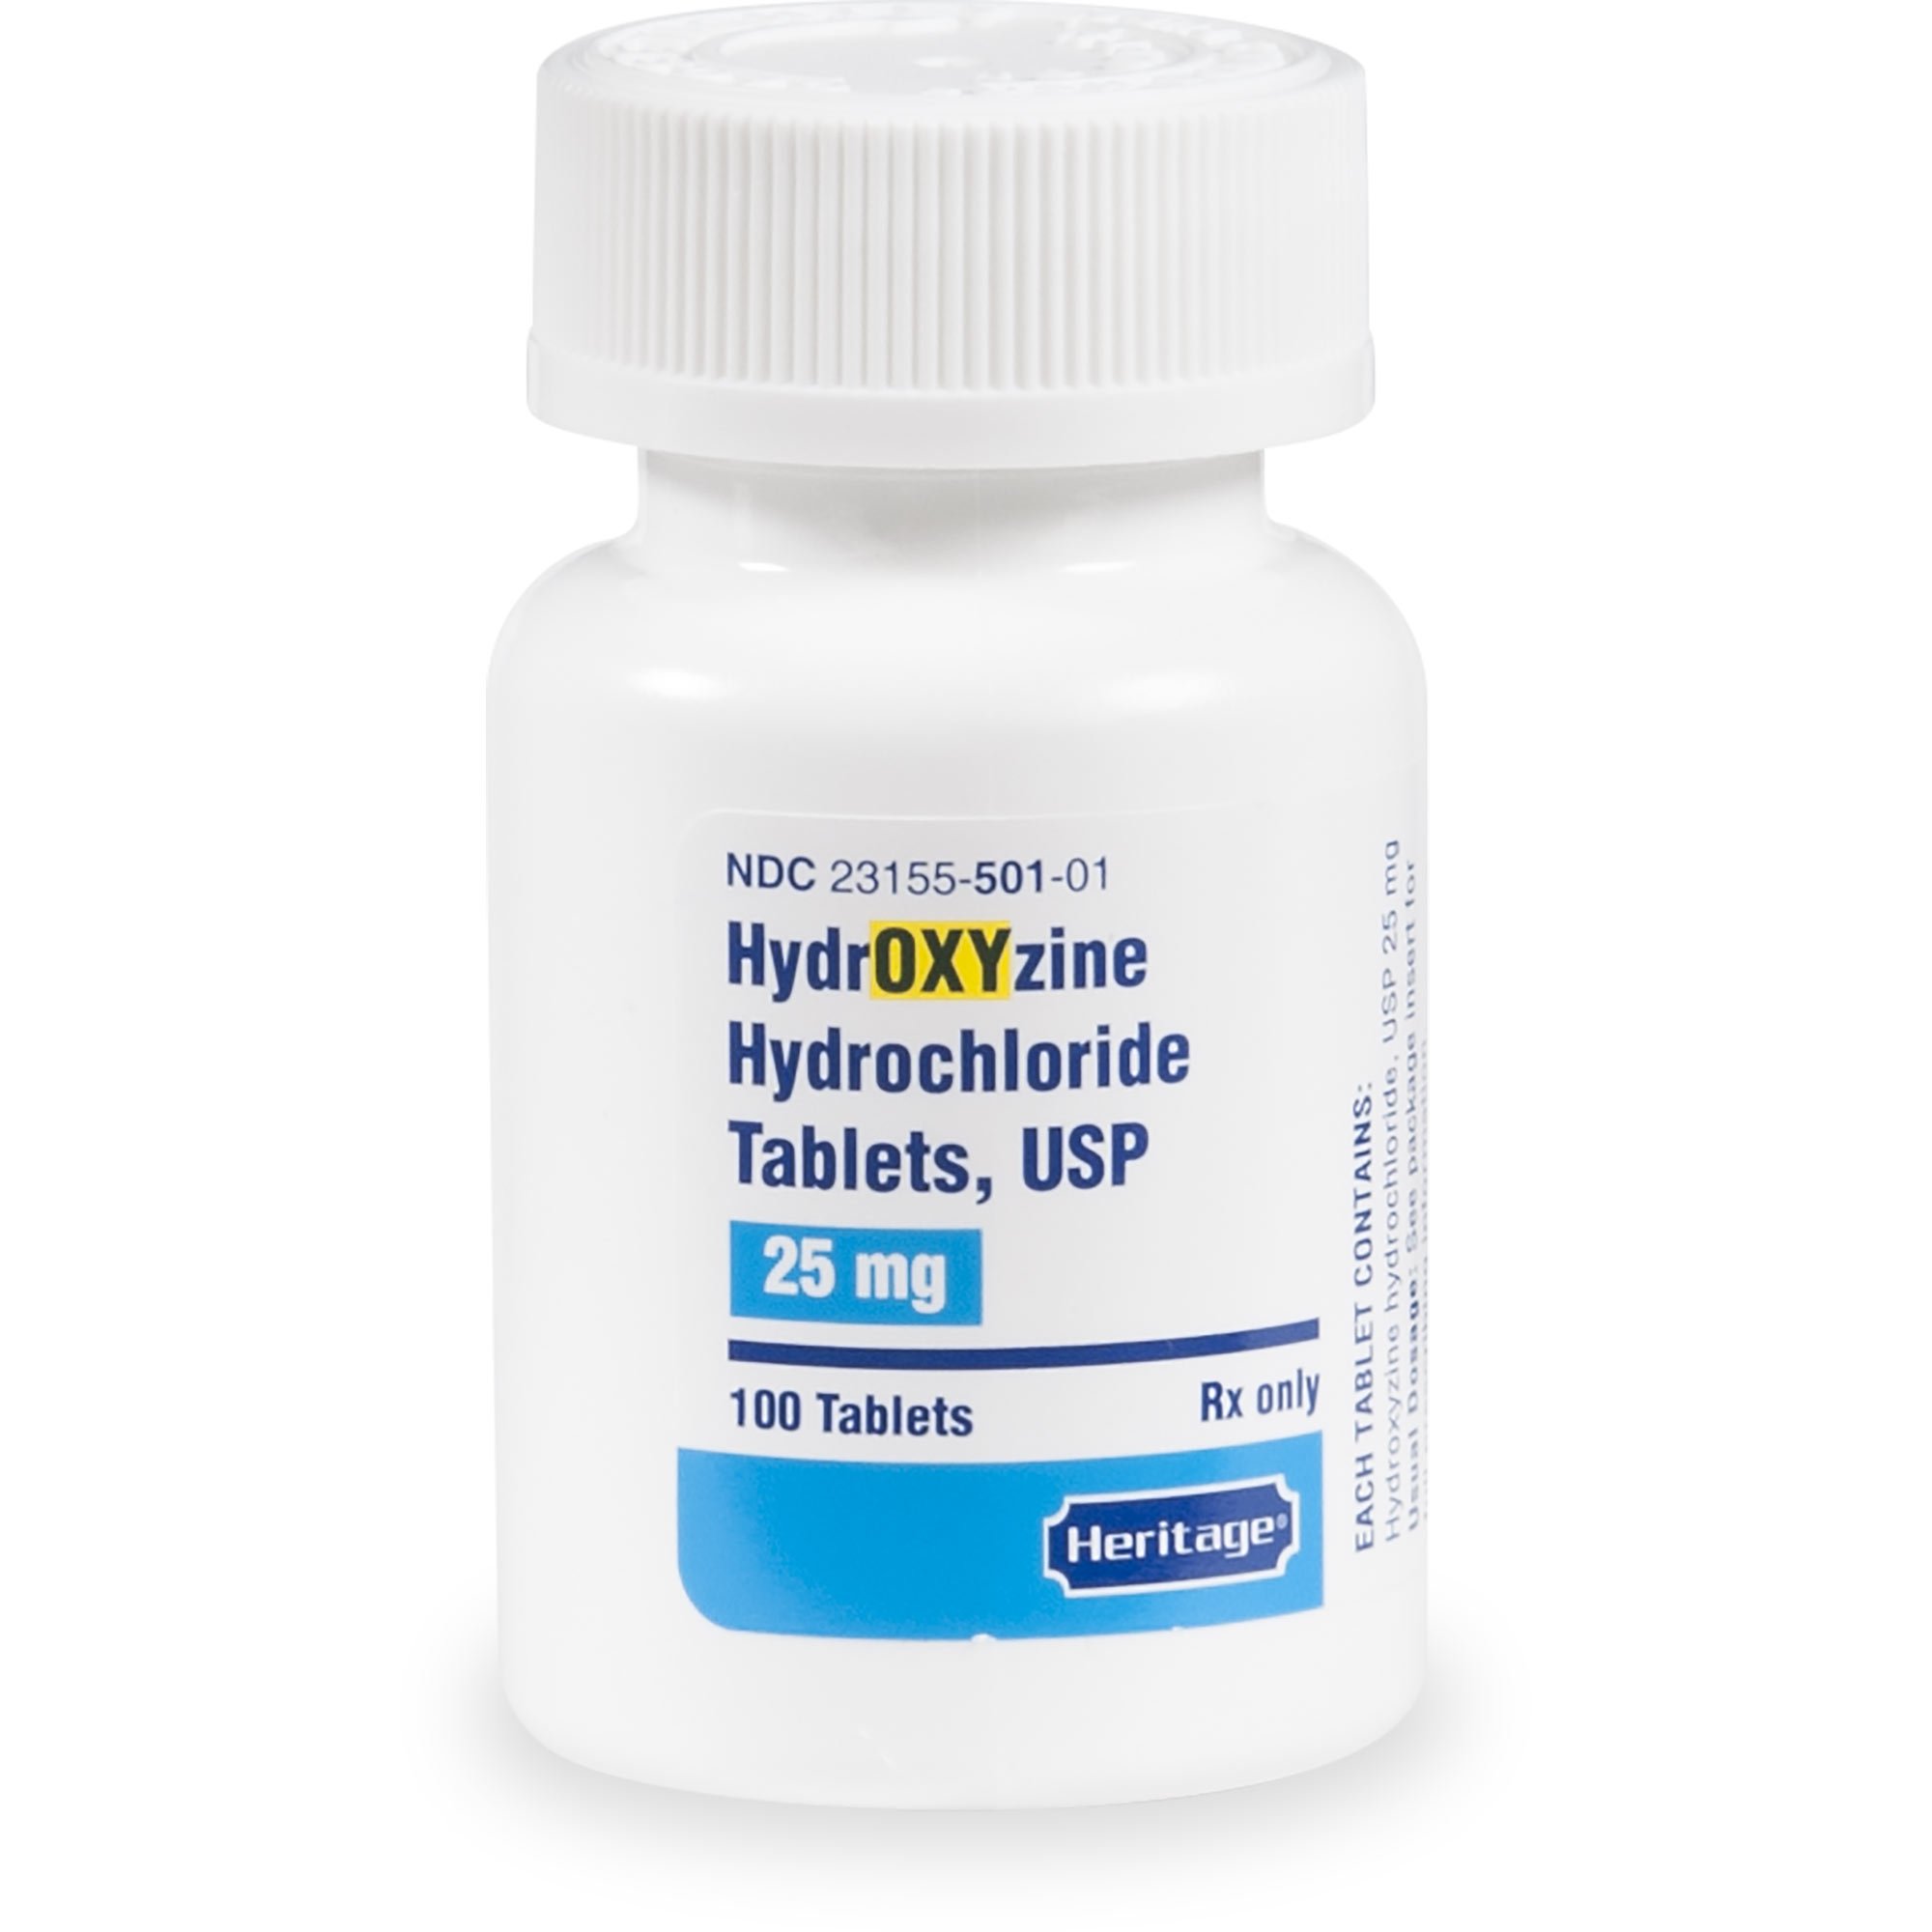 what is hydroxyzine pamoate for